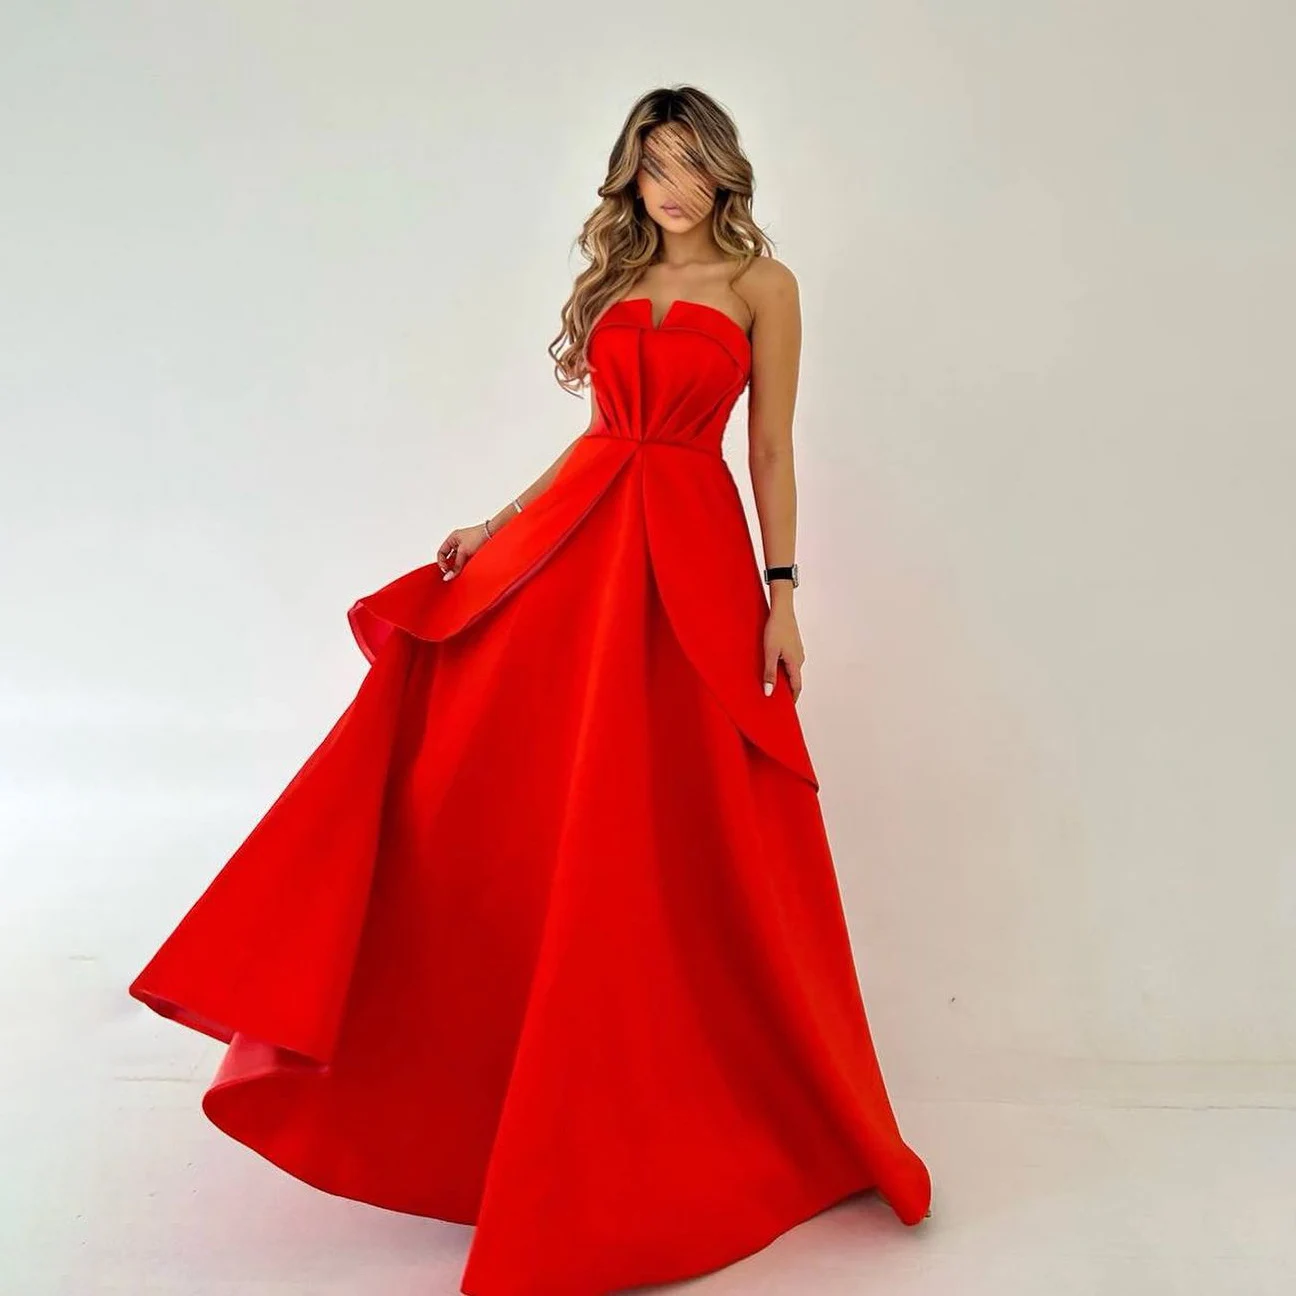 

GIOIO Strapless Luxury Formal Evening Dresses Pleat Tiered Sleeveless فساتين سهرة Floor Length Elegant Prom Gowns Party Women